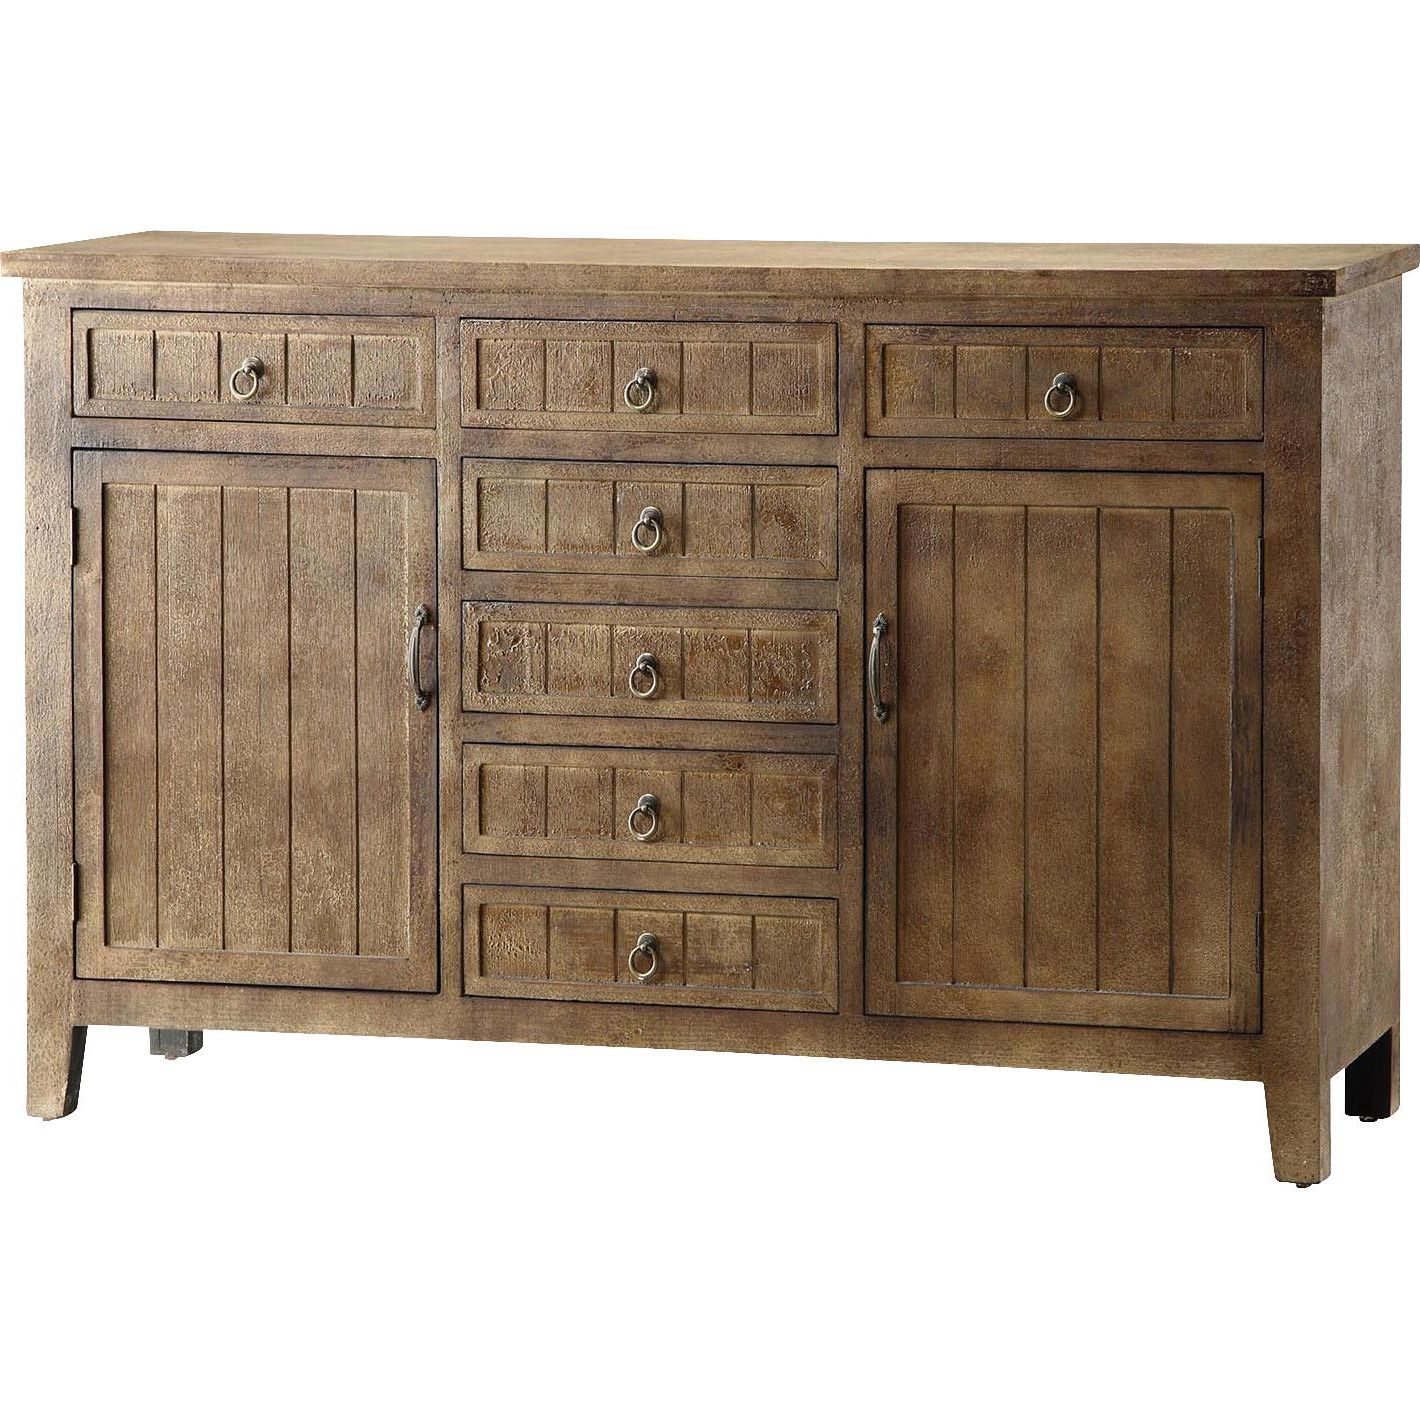 Best And Newest Crestview Collection Cheyenne Sideboard (View 10 of 20)